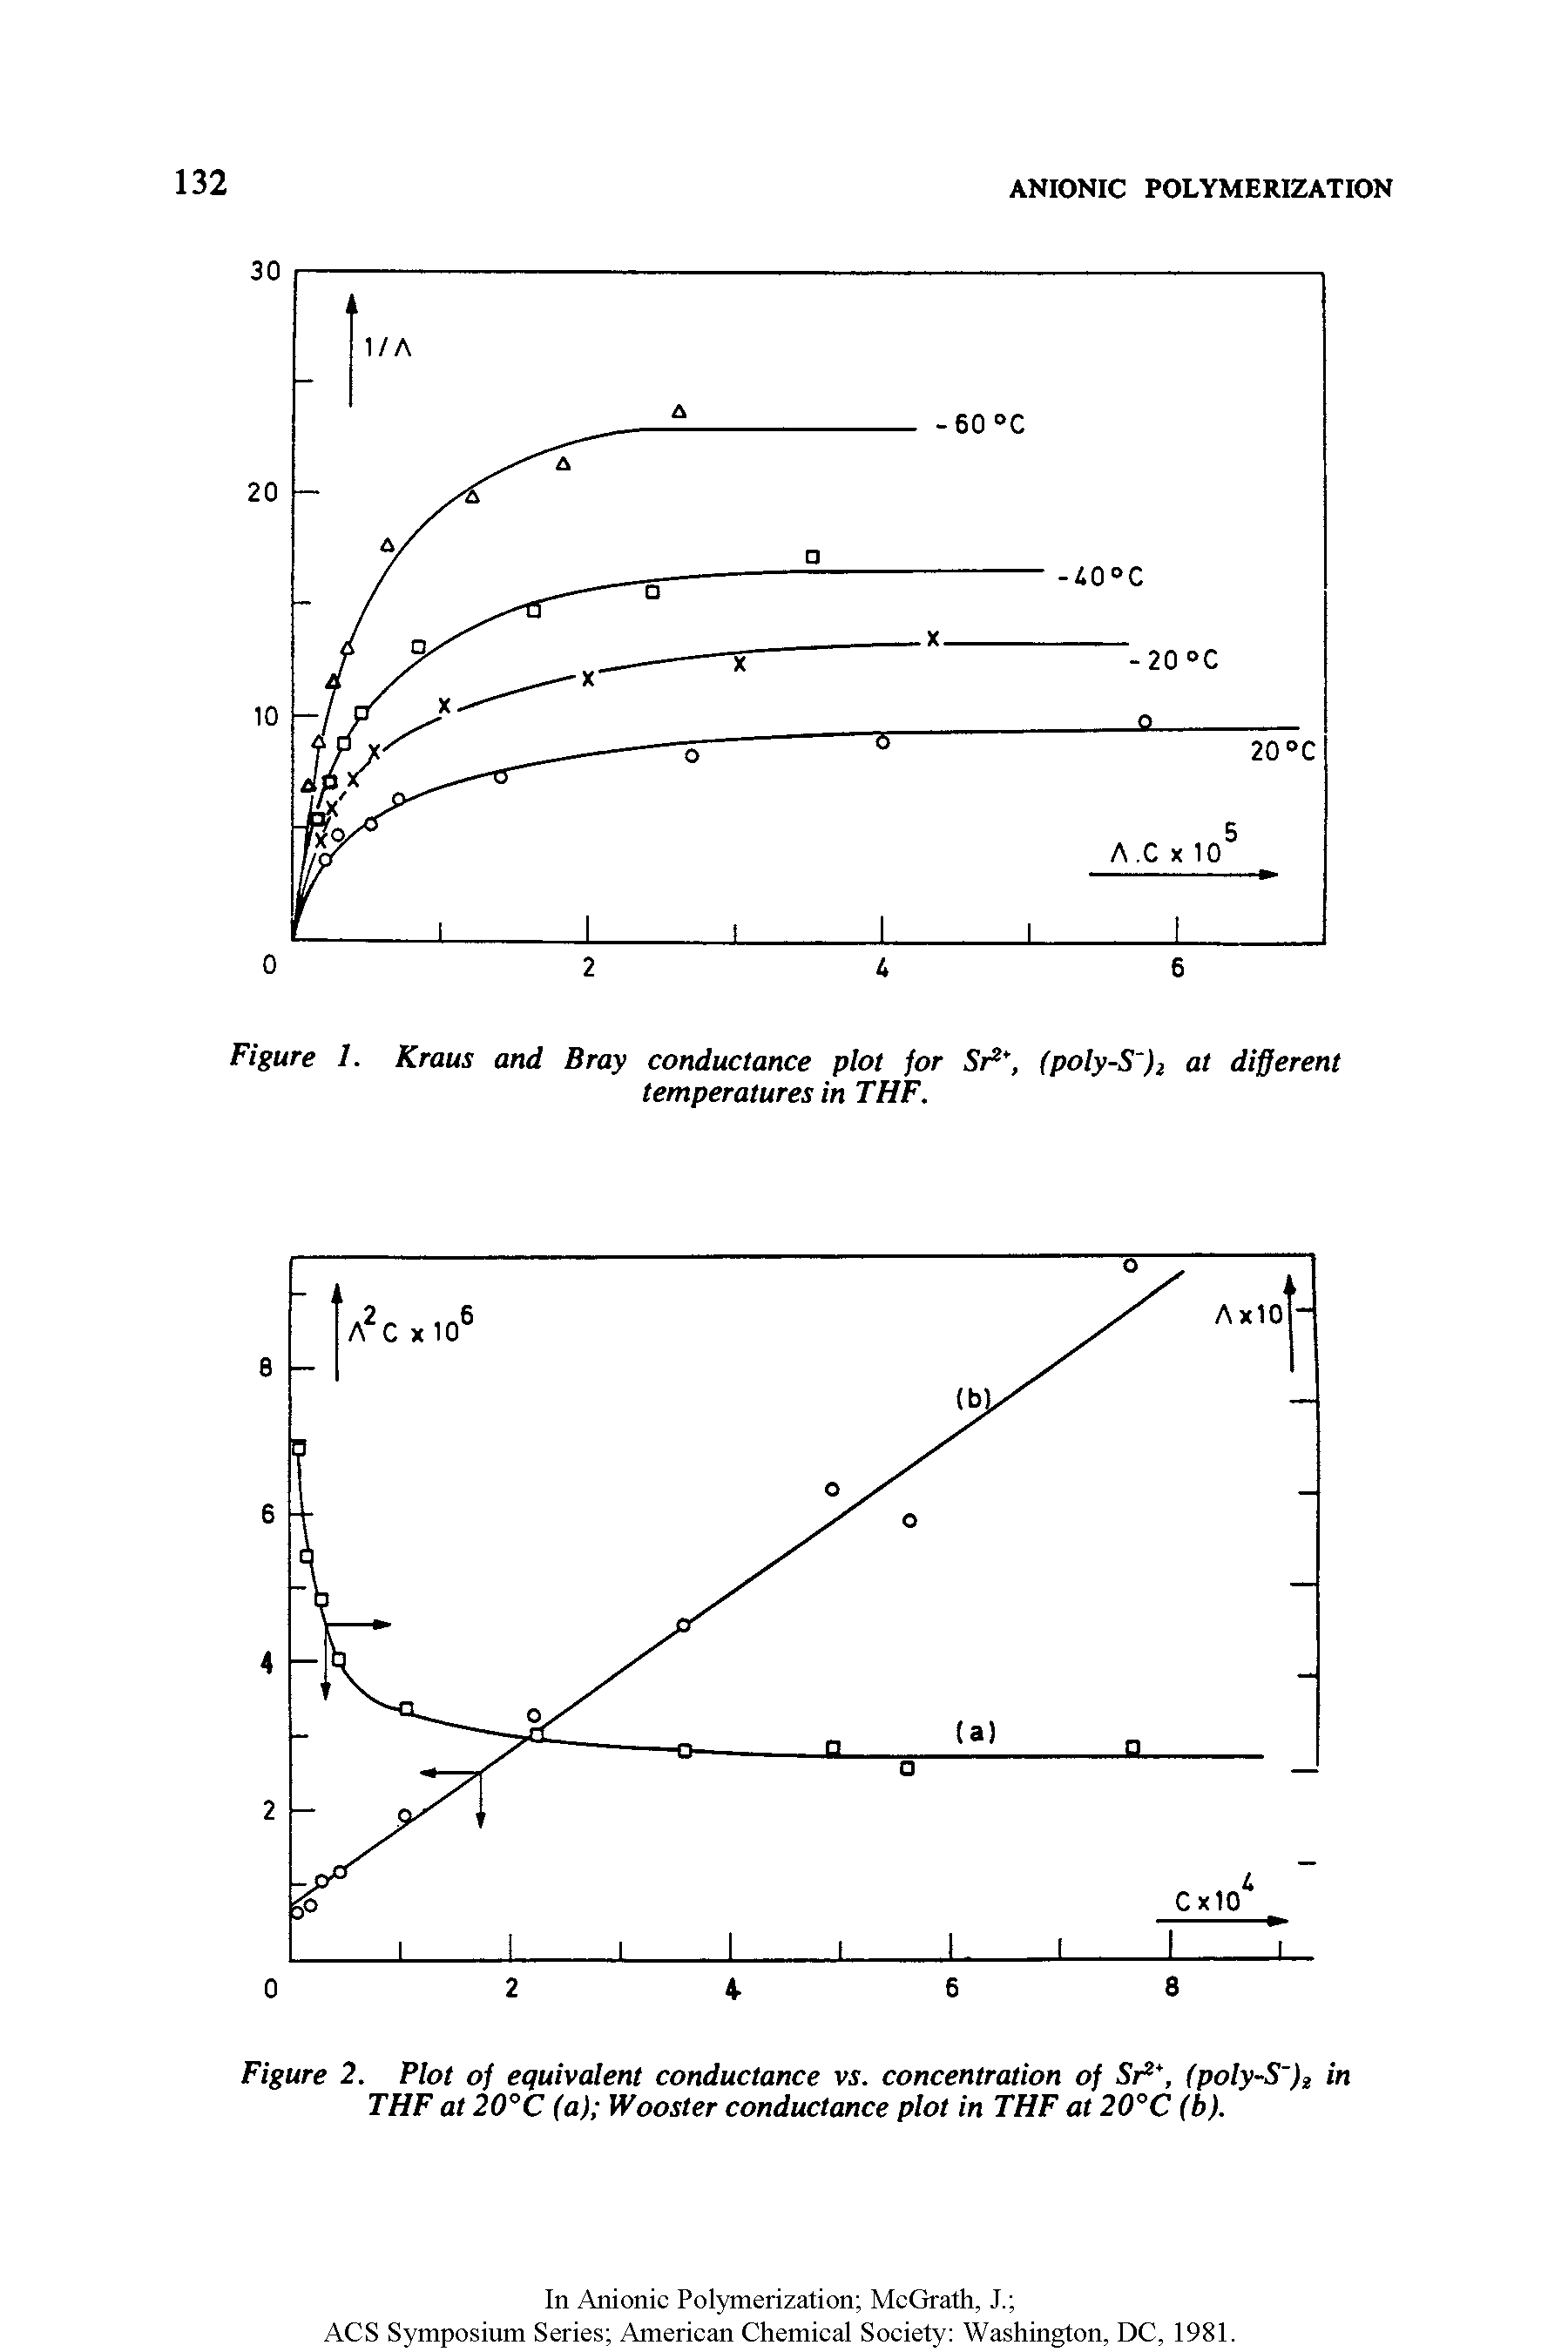 Figure 2. Plot of equivalent conductance vs. concentration of Sr1, (poly-S )2 in THF at 20°C (a) Wooster conductance plot in THF at 20°C (b).